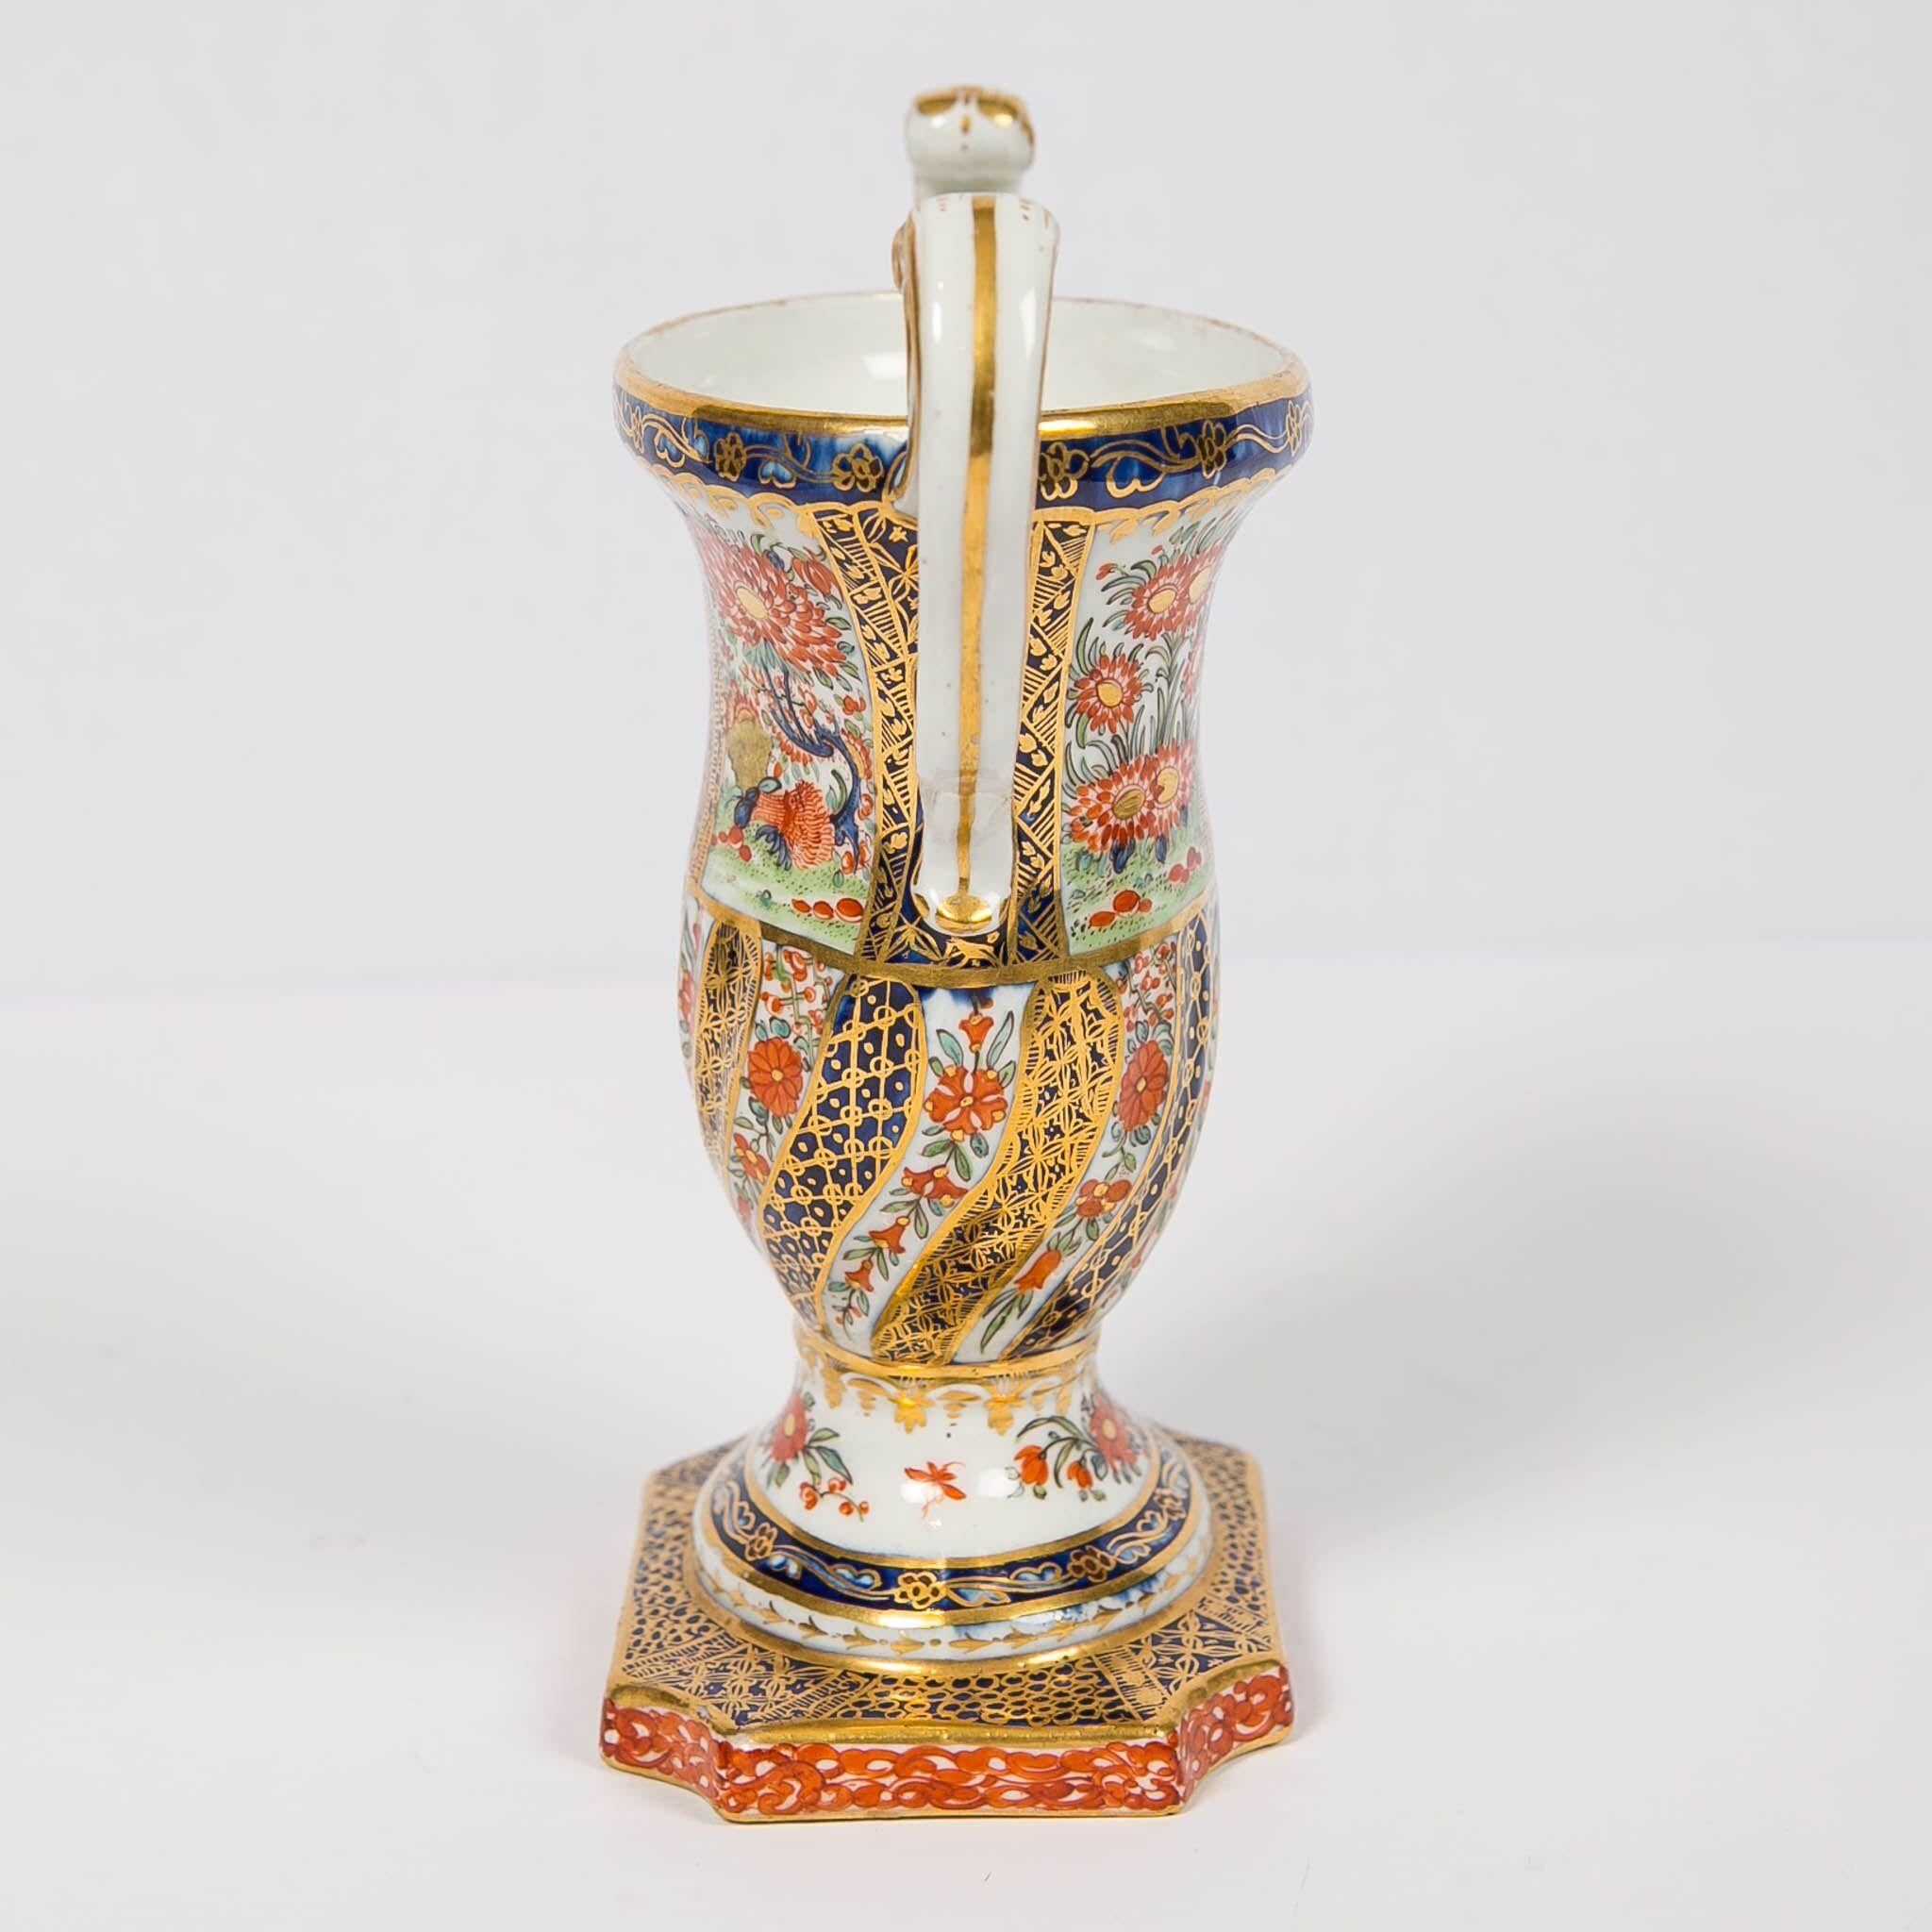 Hand-Painted Worcester Porcelain Imari Bud Vase Hand Painted in England, circa 1810